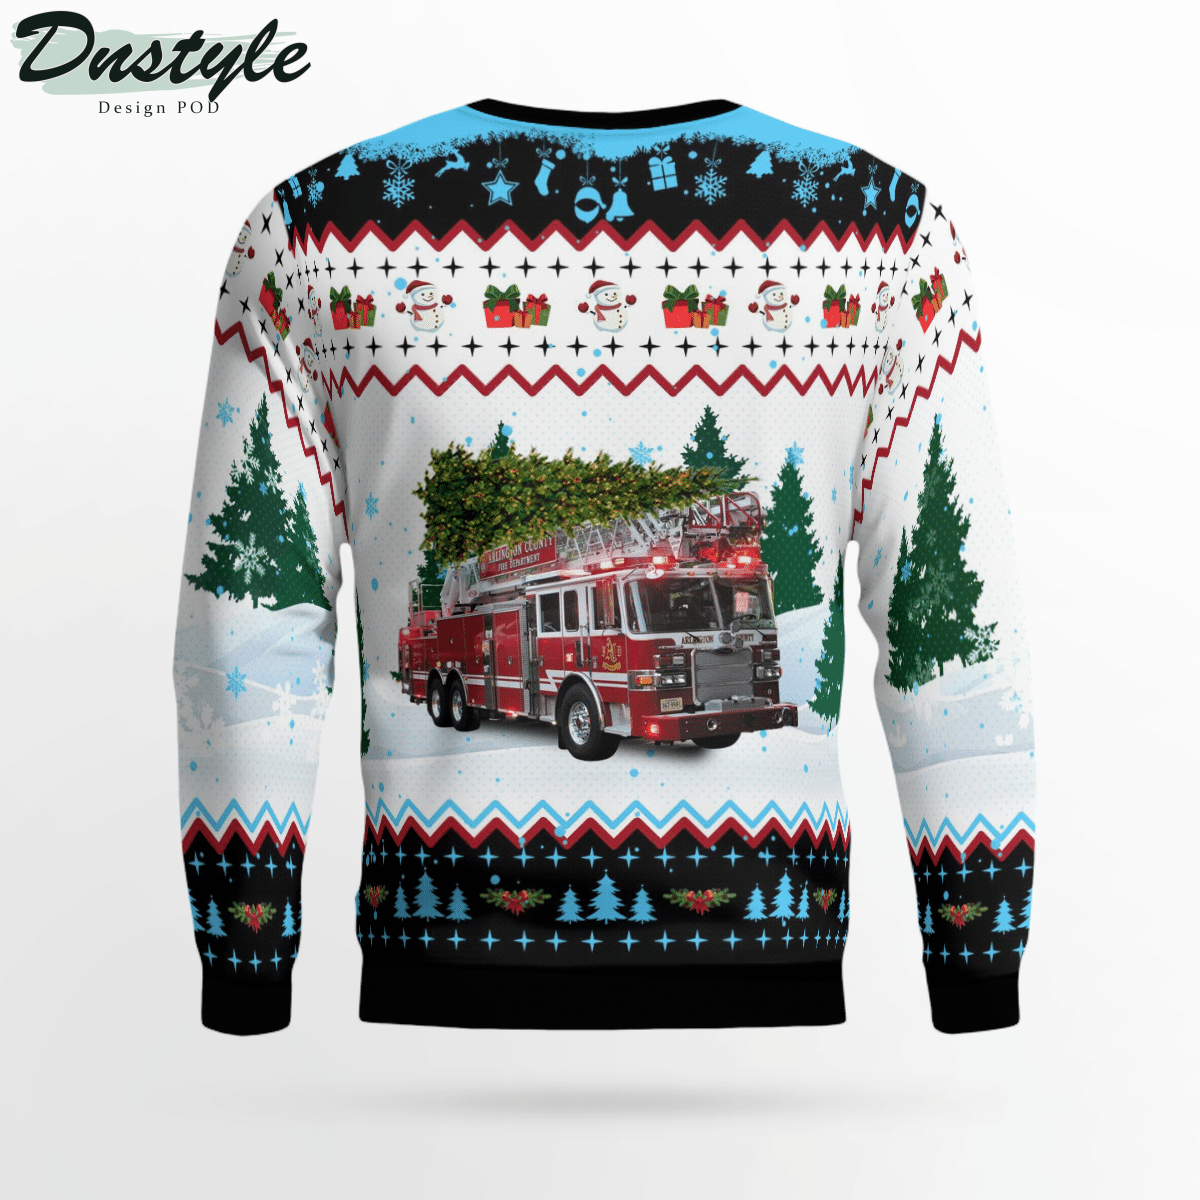 Arlington County Fire Department Ugly Christmas Sweater